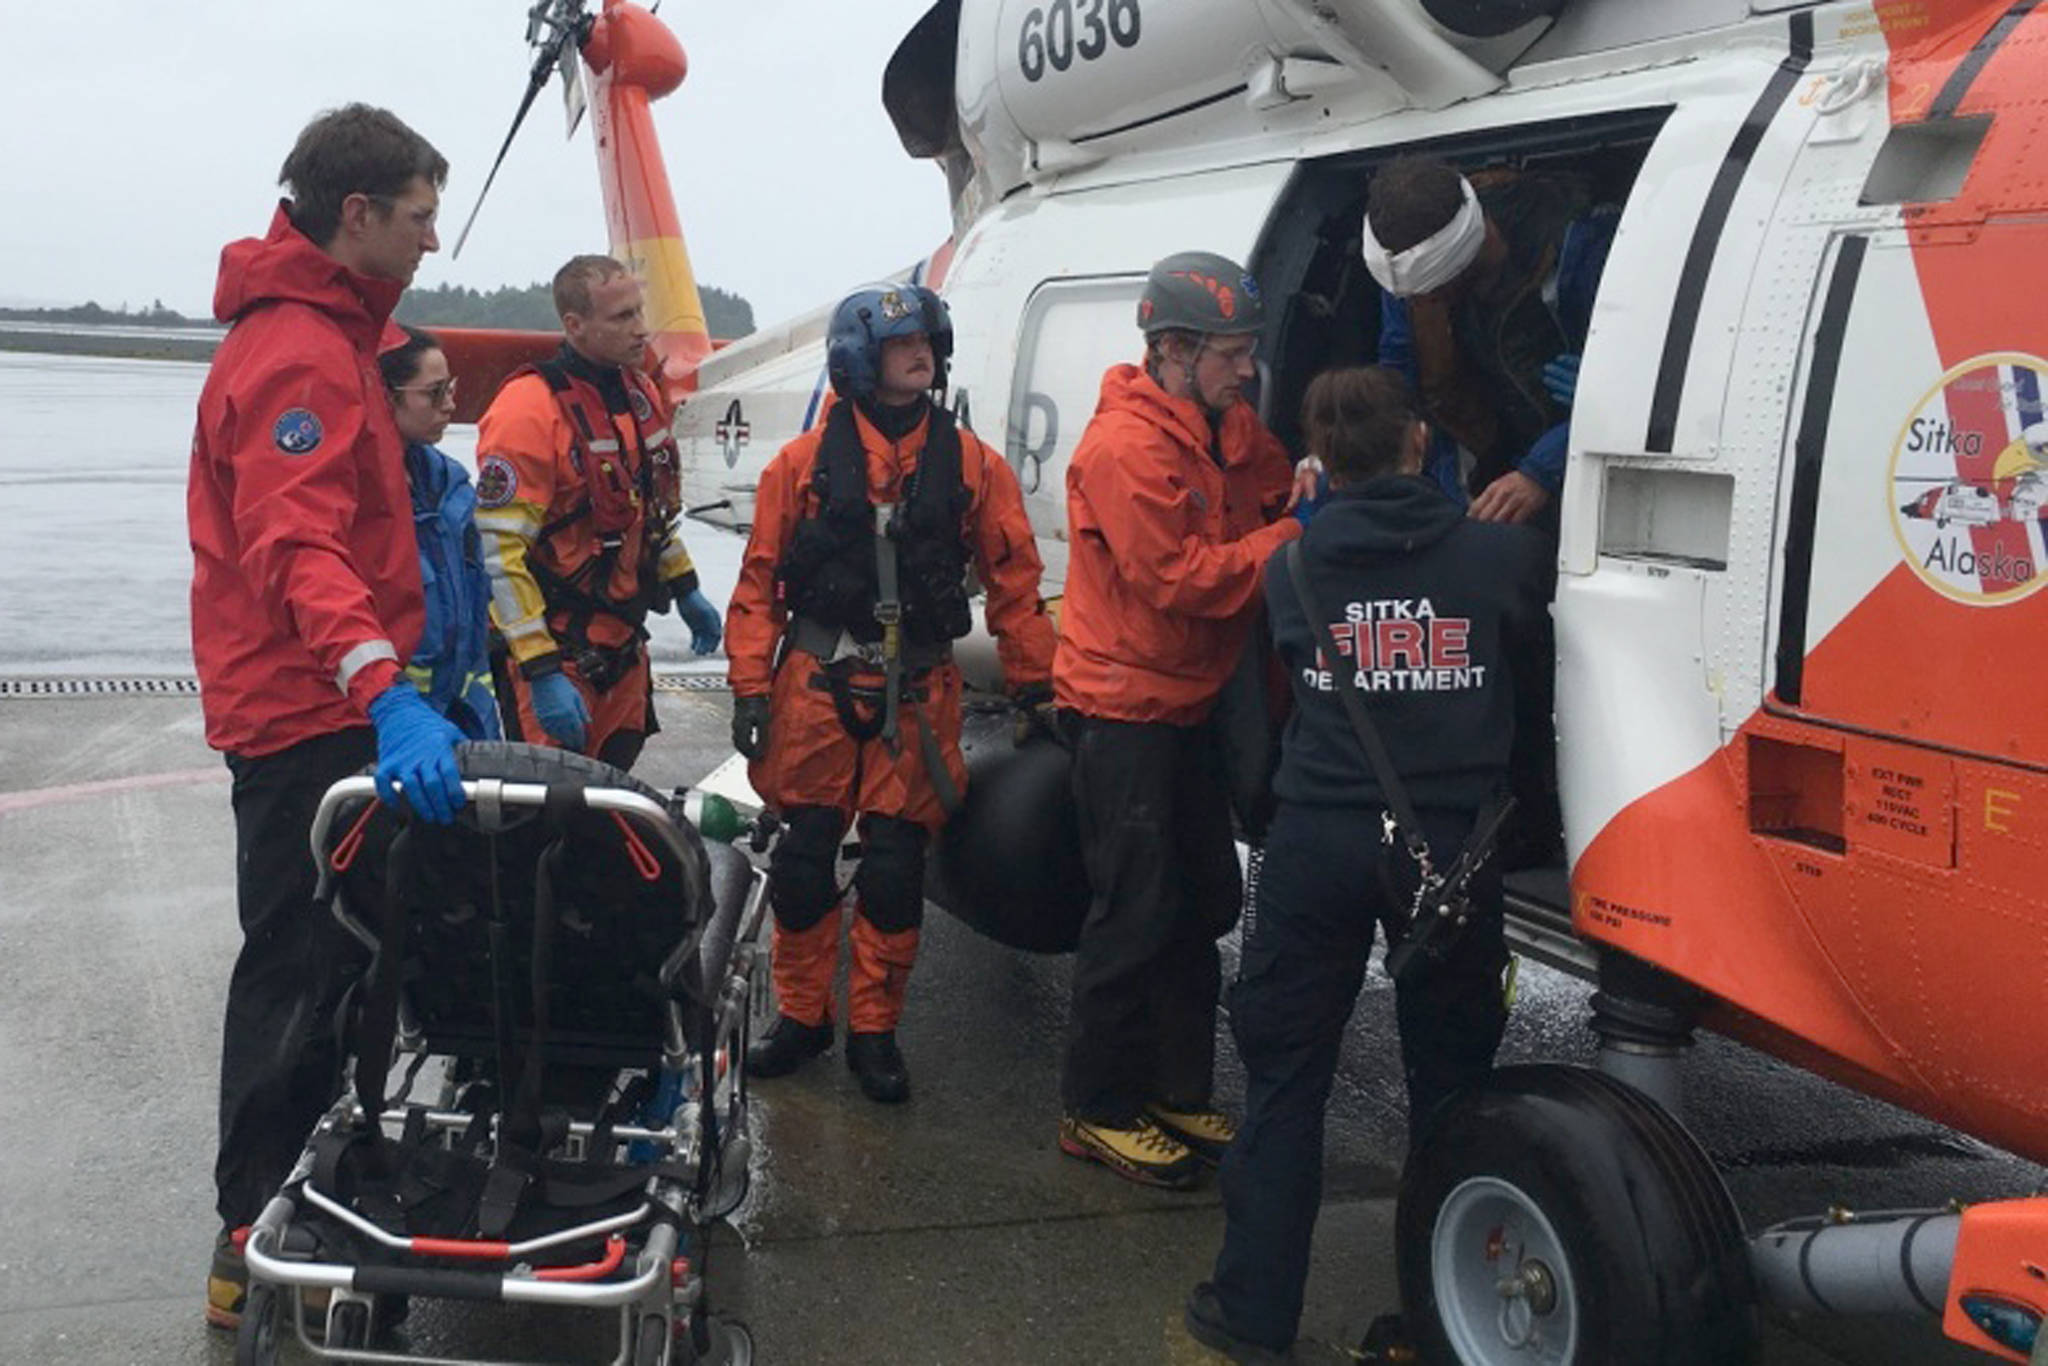 Man survives 100-foot fall off Sitka cliff